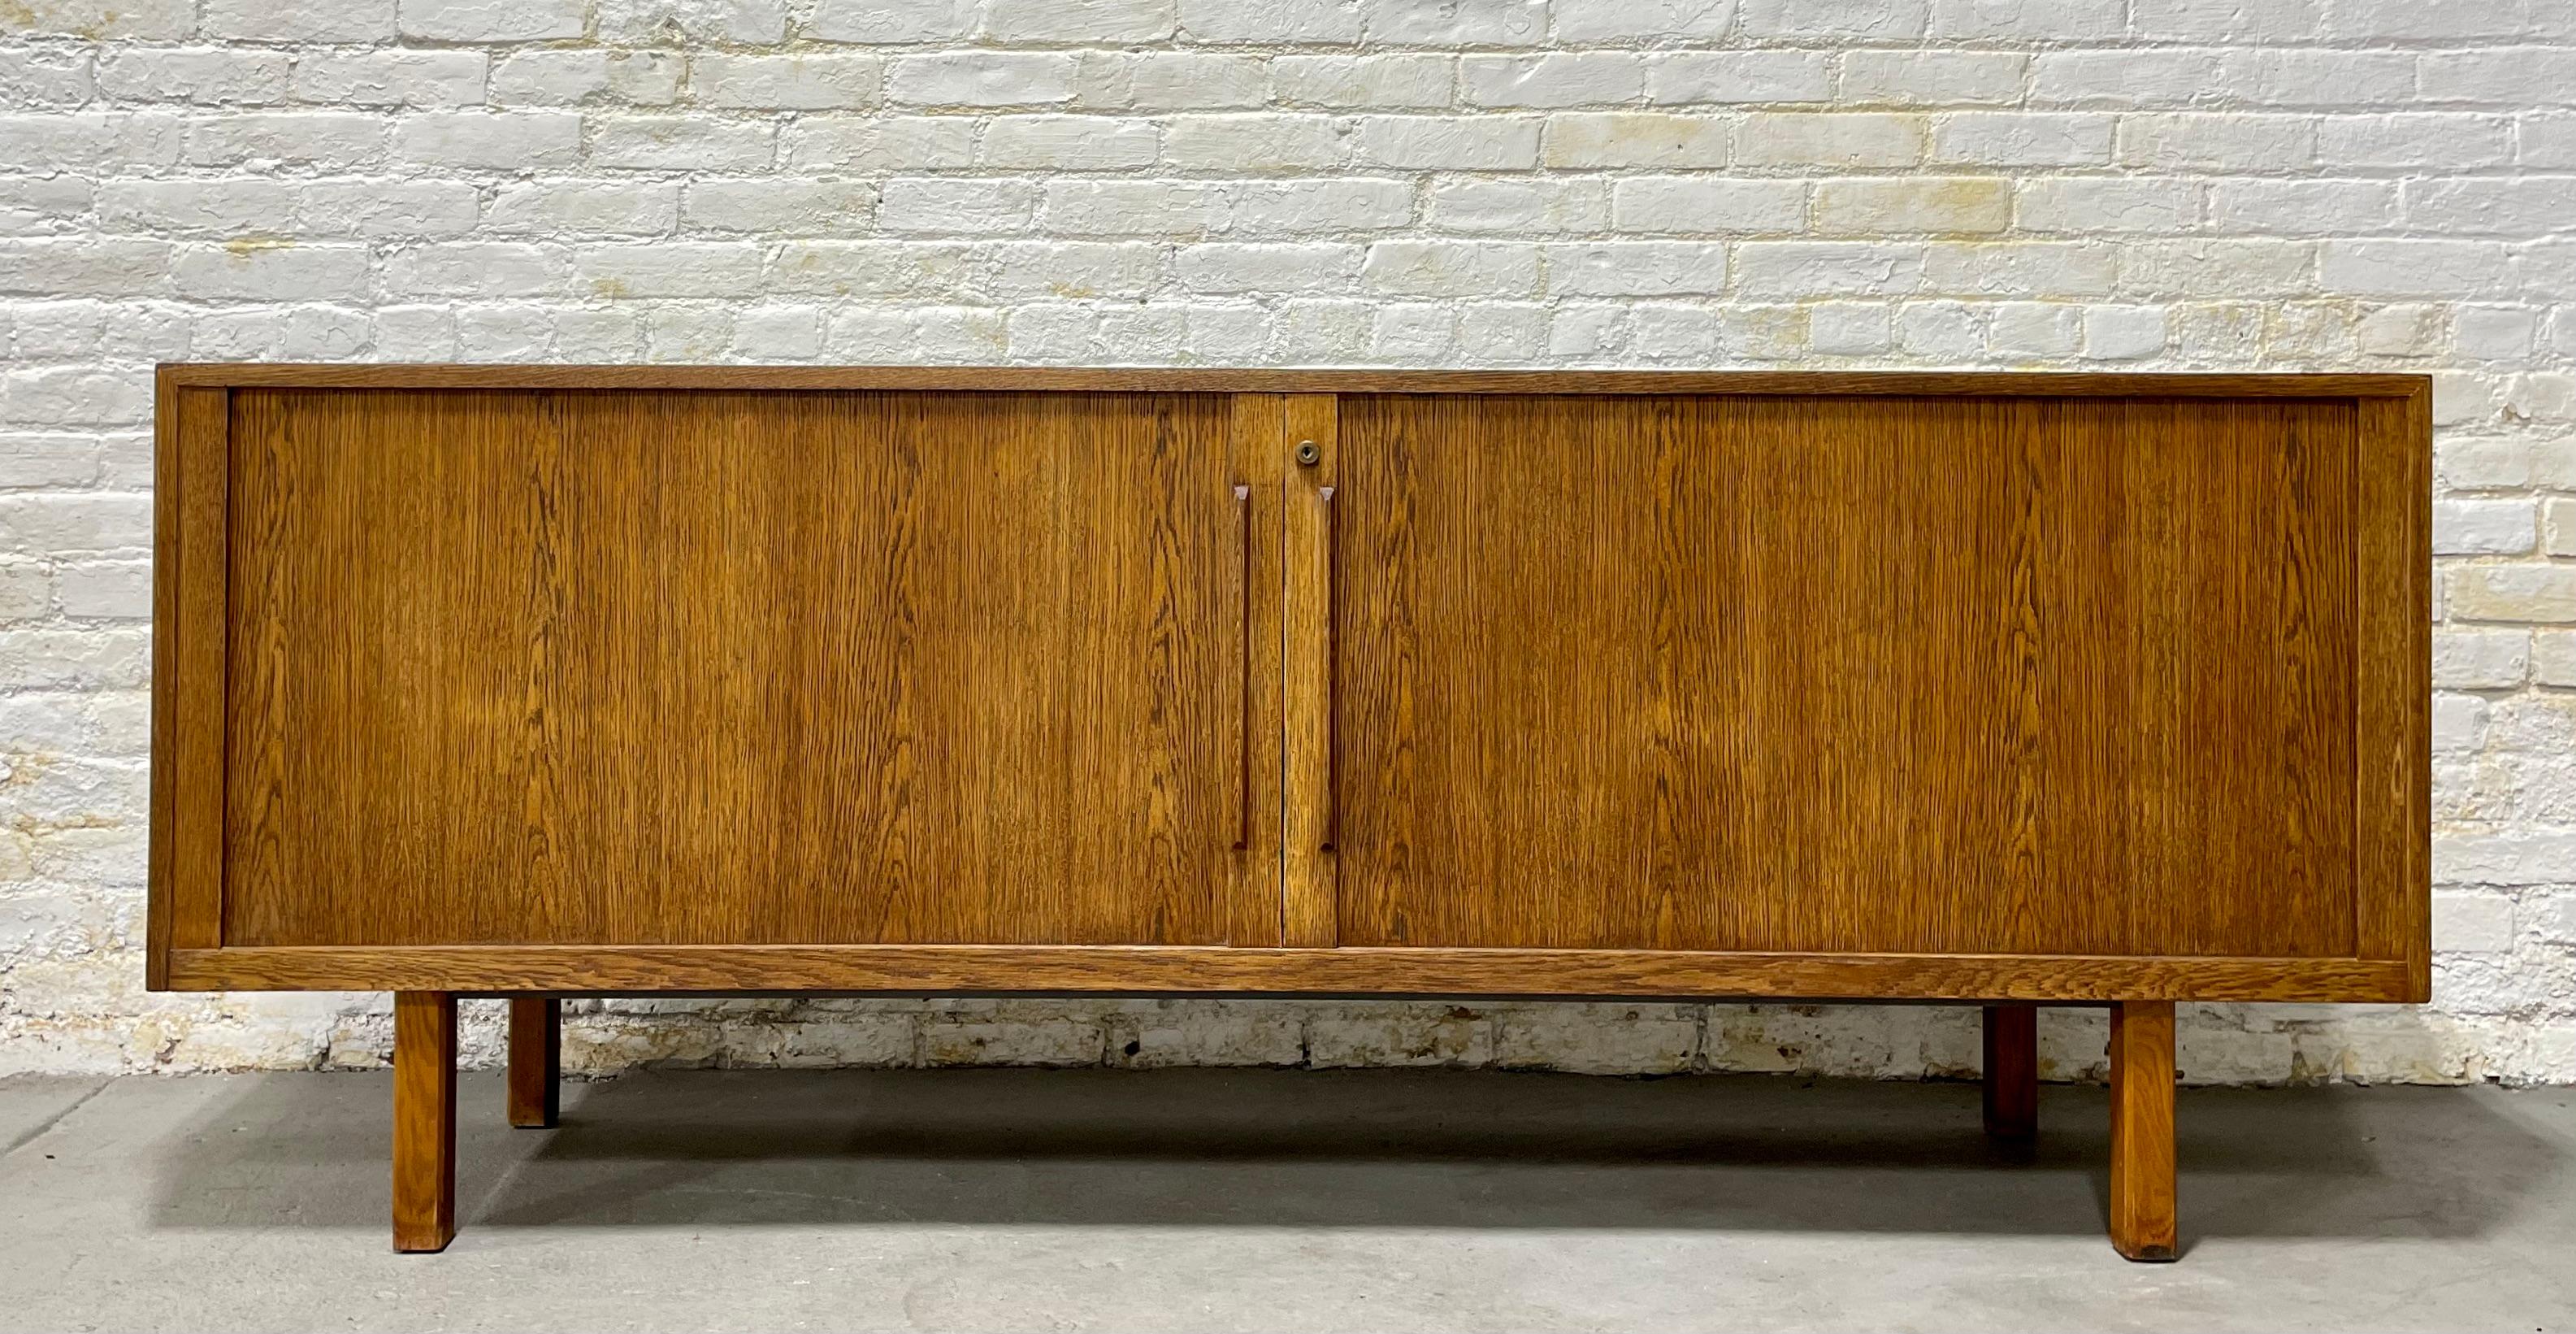 Extra Long Mid-Century Modern Oak Tambour Door Credenza / Media stand, circa 1960s. This monumental piece is gorgeous in its simple yet extremely functional design. Tambour door credenzas are usually found in teak but this beauty is made from oak